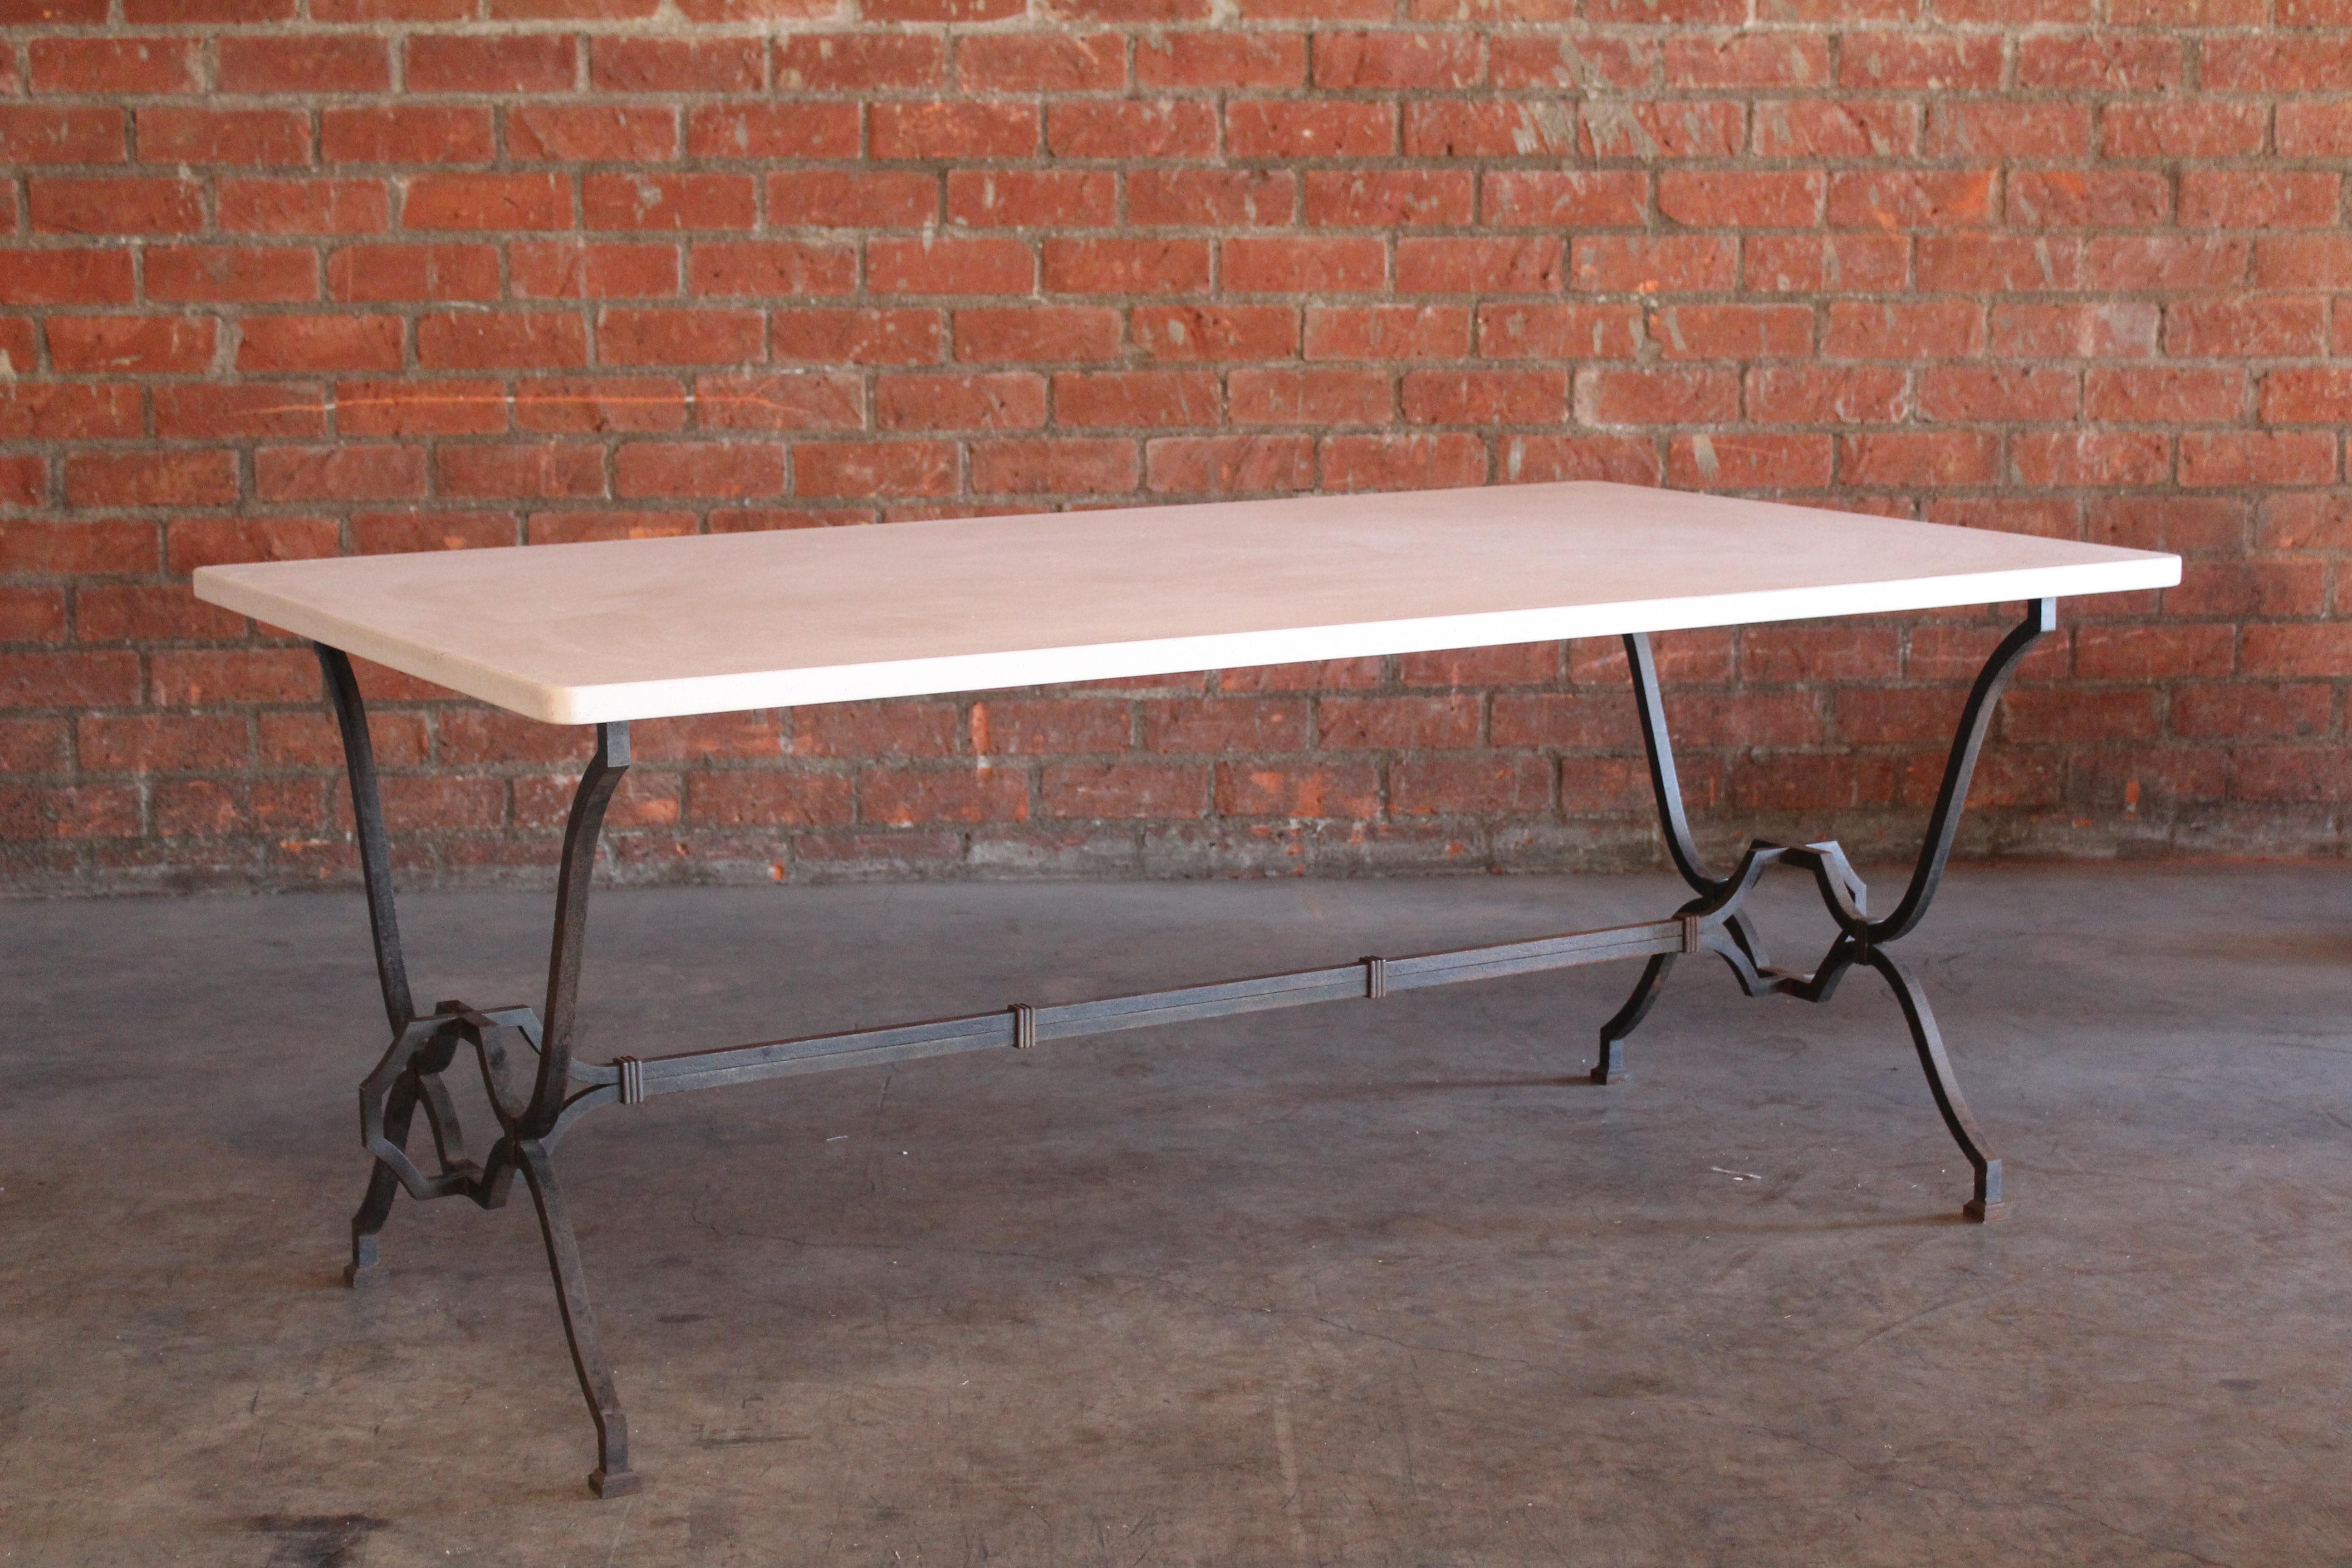 A vintage custom made dining table designed by French designer René Prou in the 1940s. Heavy wrouht iron with French limestone top. In excellent condition. Base shows patina. Measures: 70